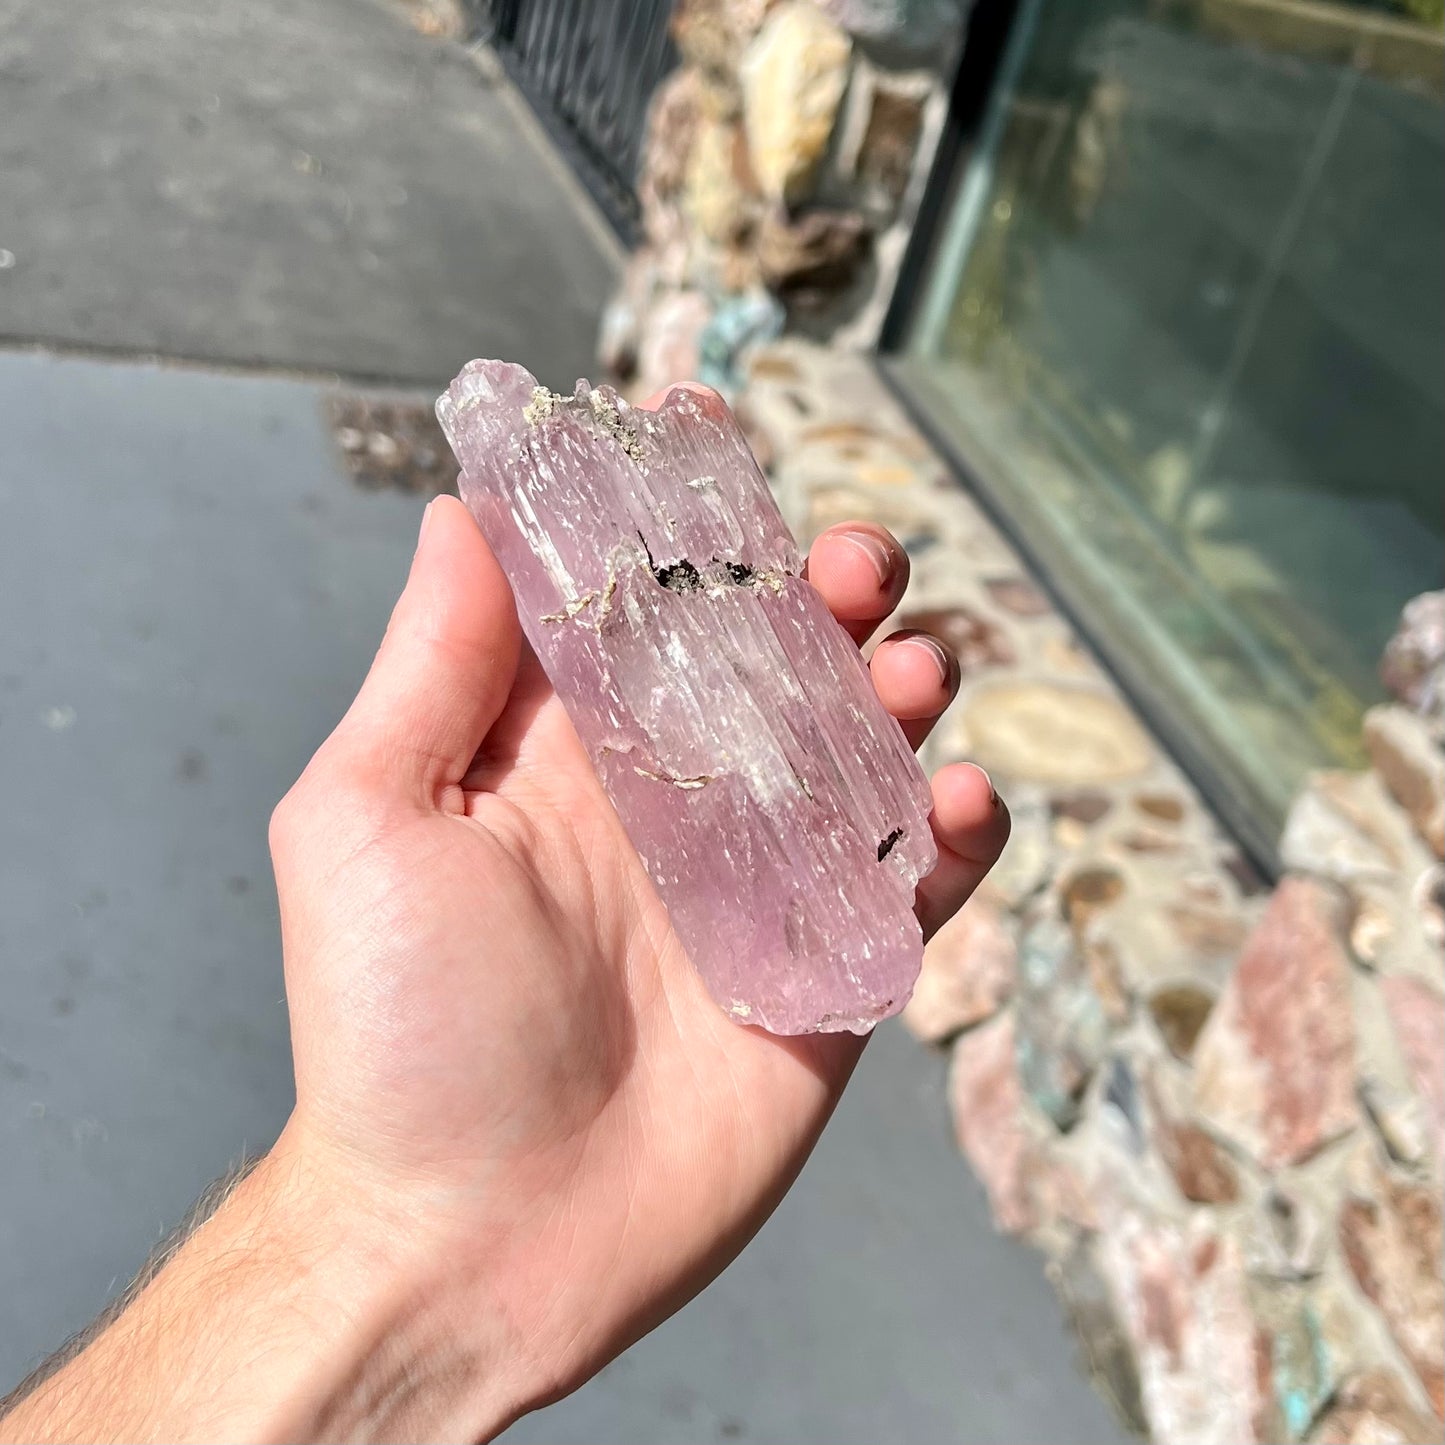 A five inch long pink kunzite crystal.  The crystal is purple when viewed down the ends.